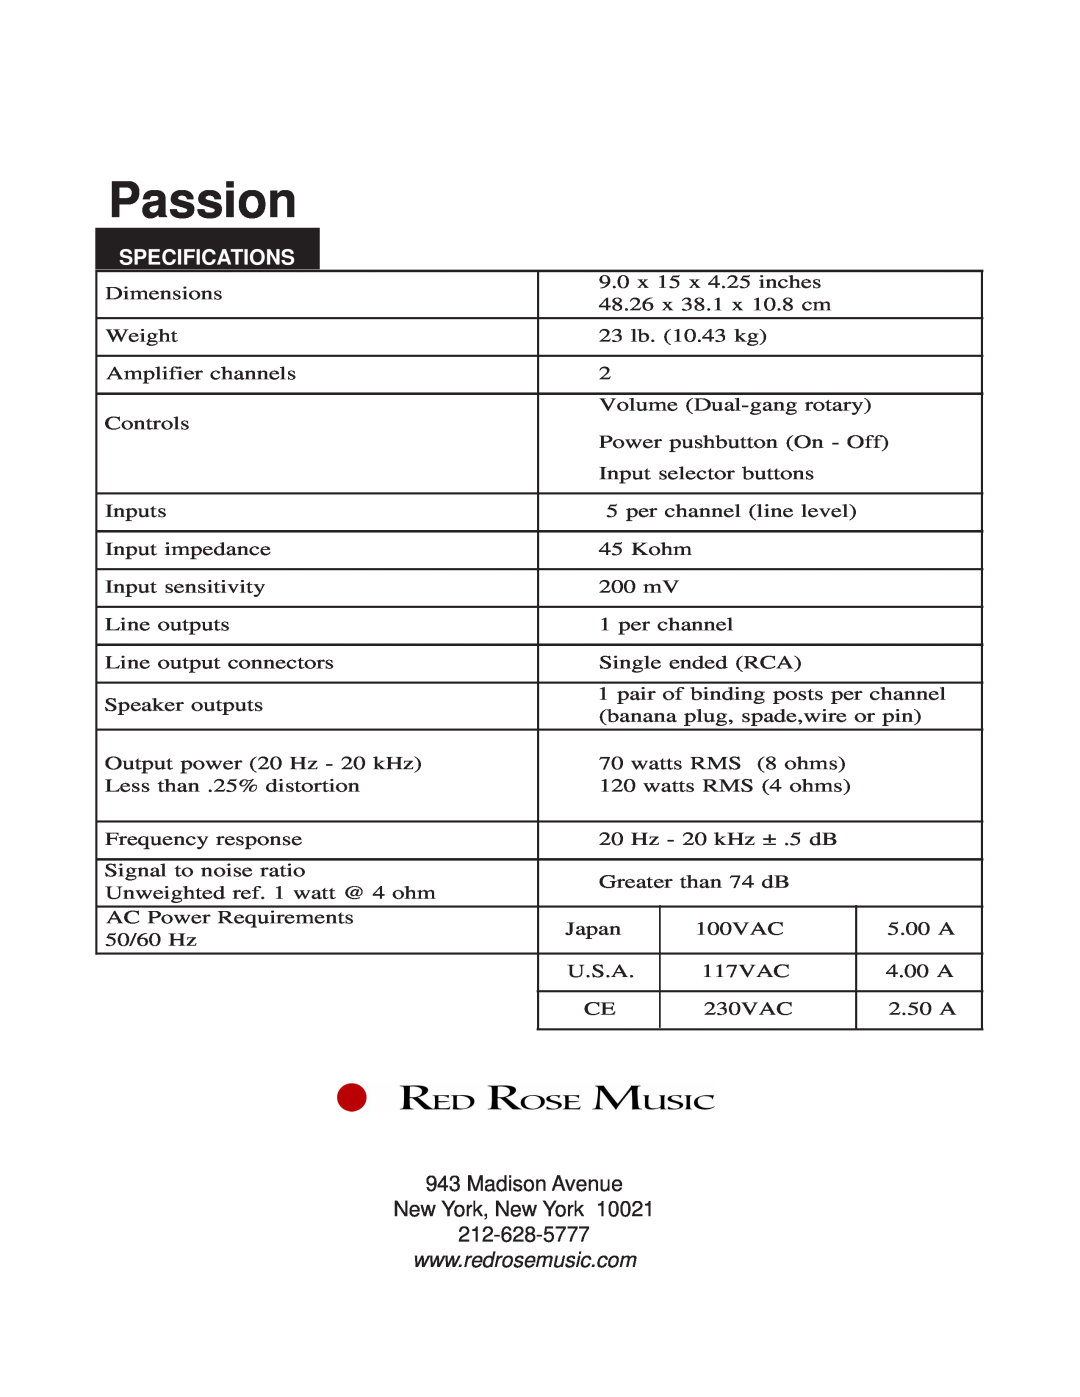 Red Rose Music Affirmation manual Passion, Specifications, Madison Avenue New York, New York 